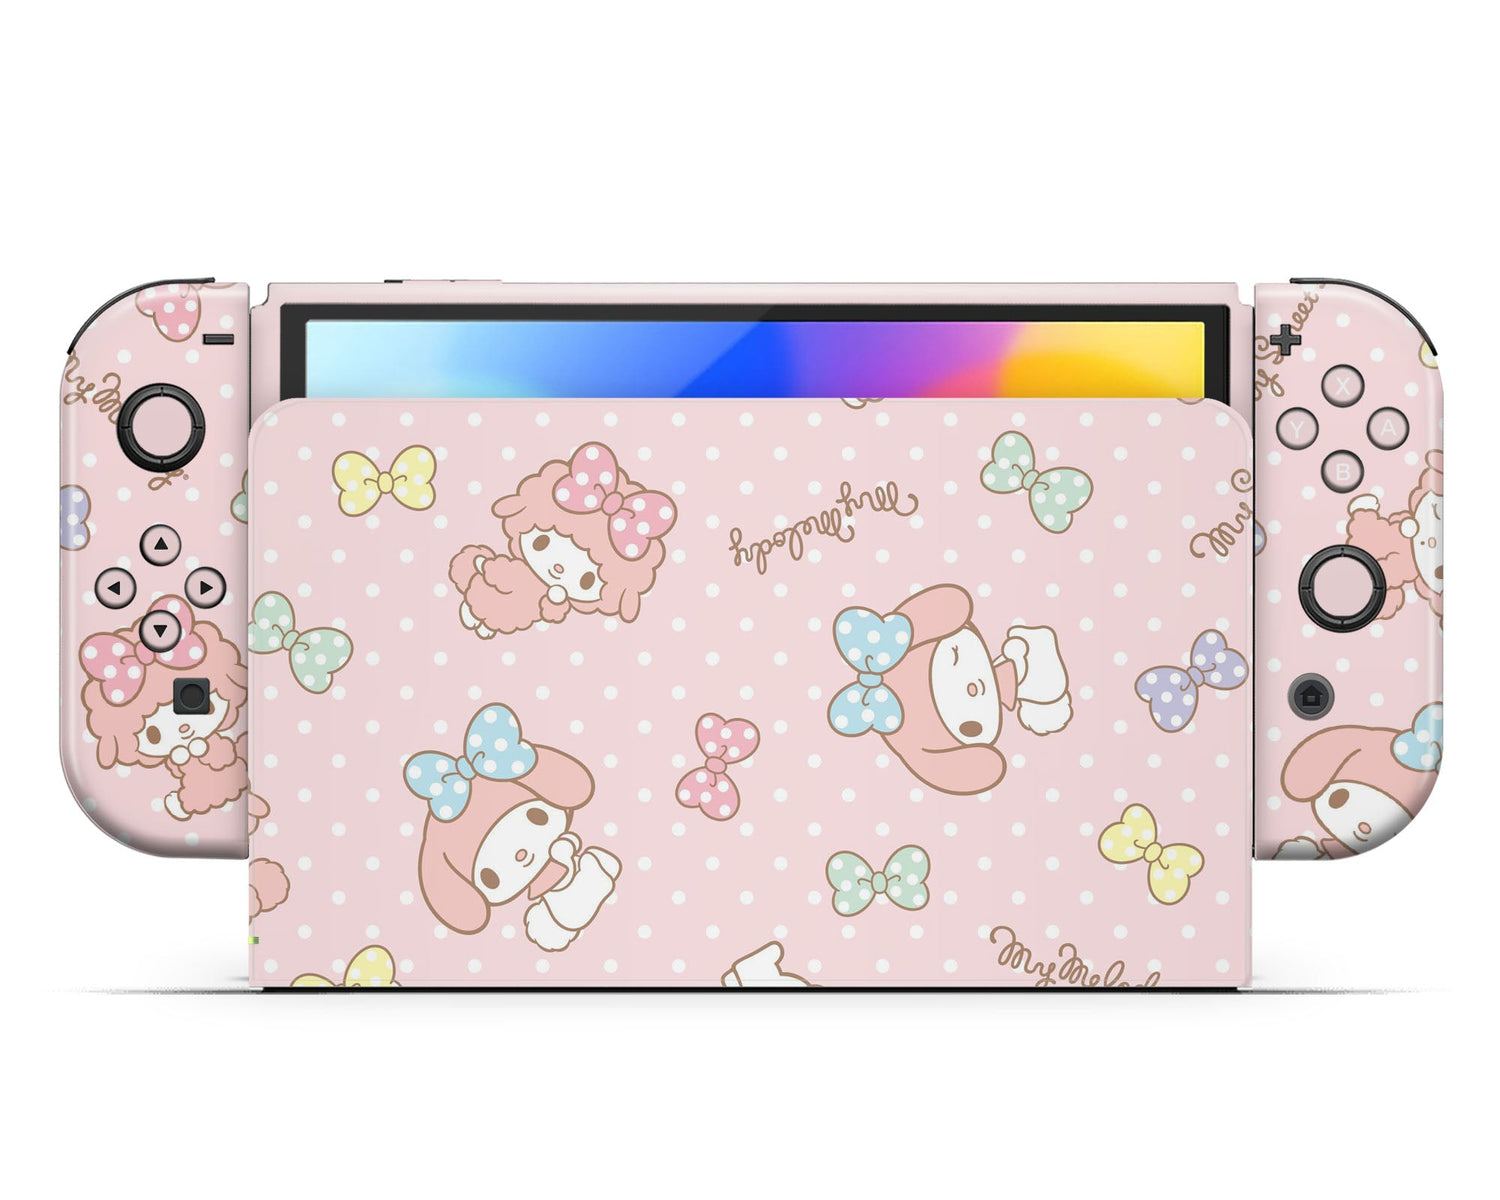 Lux Skins Nintendo Switch OLED My Melody Pink Full Set +Tempered Glass Skins - Pop culture Sanrio Skin